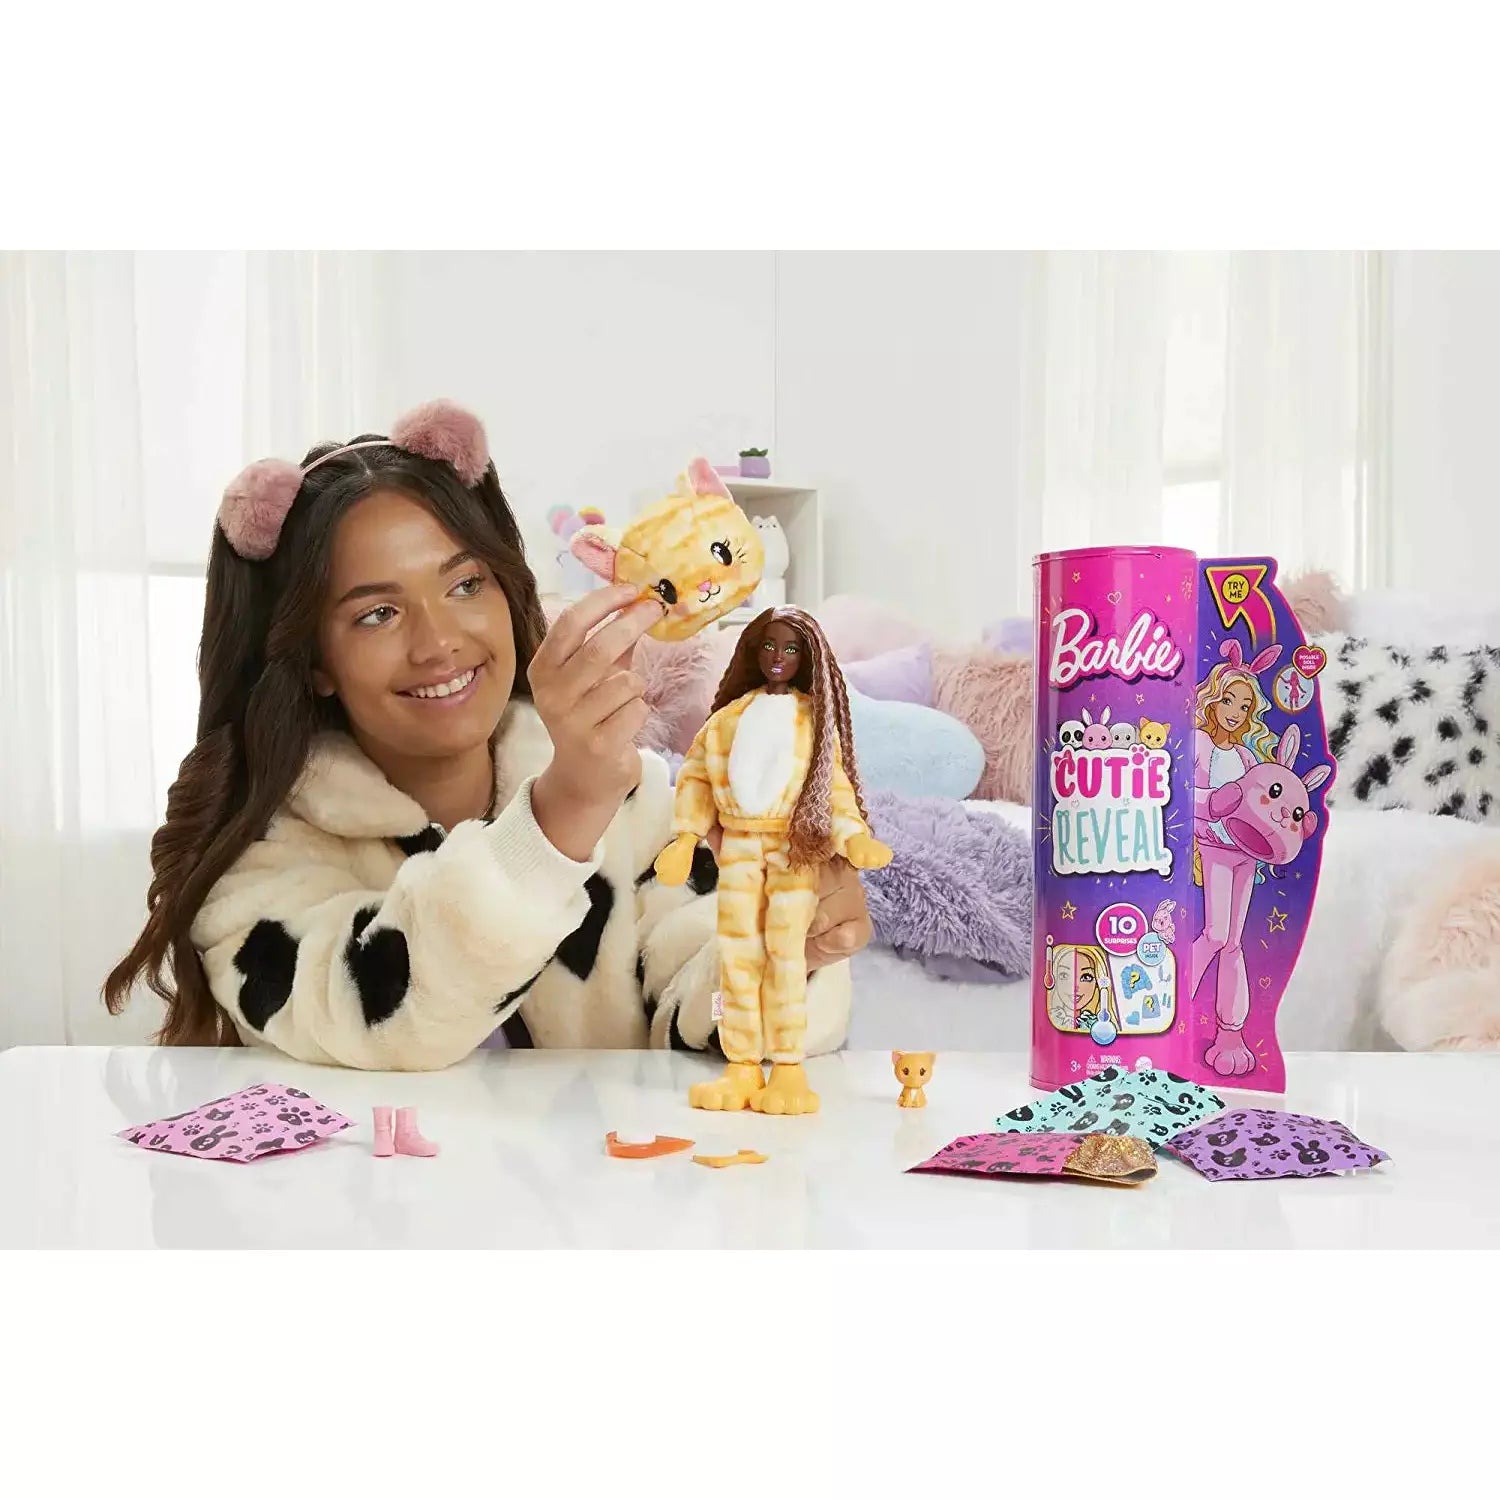 Barbie Cutie Reveal Doll With Kitty Plush Costume & 10 Surprises Including Mini Pet & Color Change - BumbleToys - 5-7 Years, Barbie, Fashion Dolls & Accessories, Girls, OXE, Pre-Order